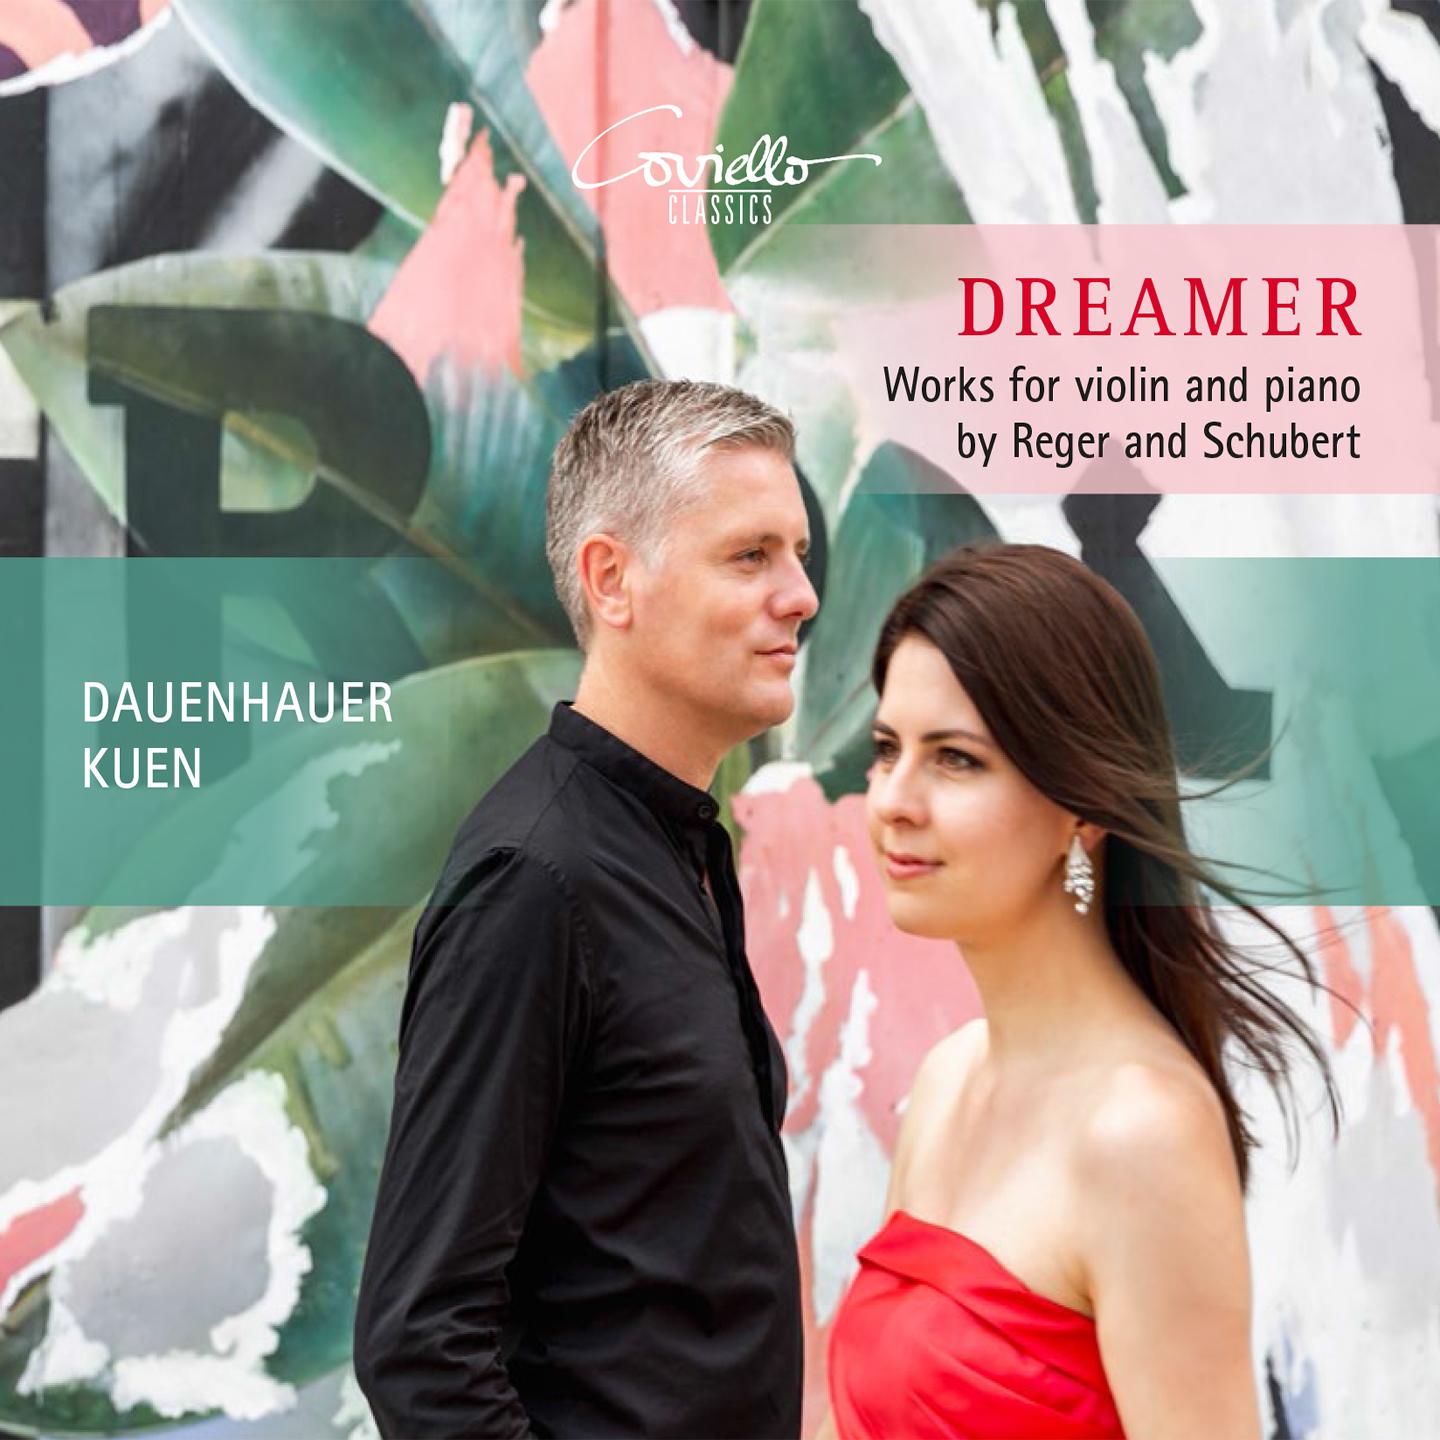 Dreamer (Works for Violin and Piano by Reger and Schubert)